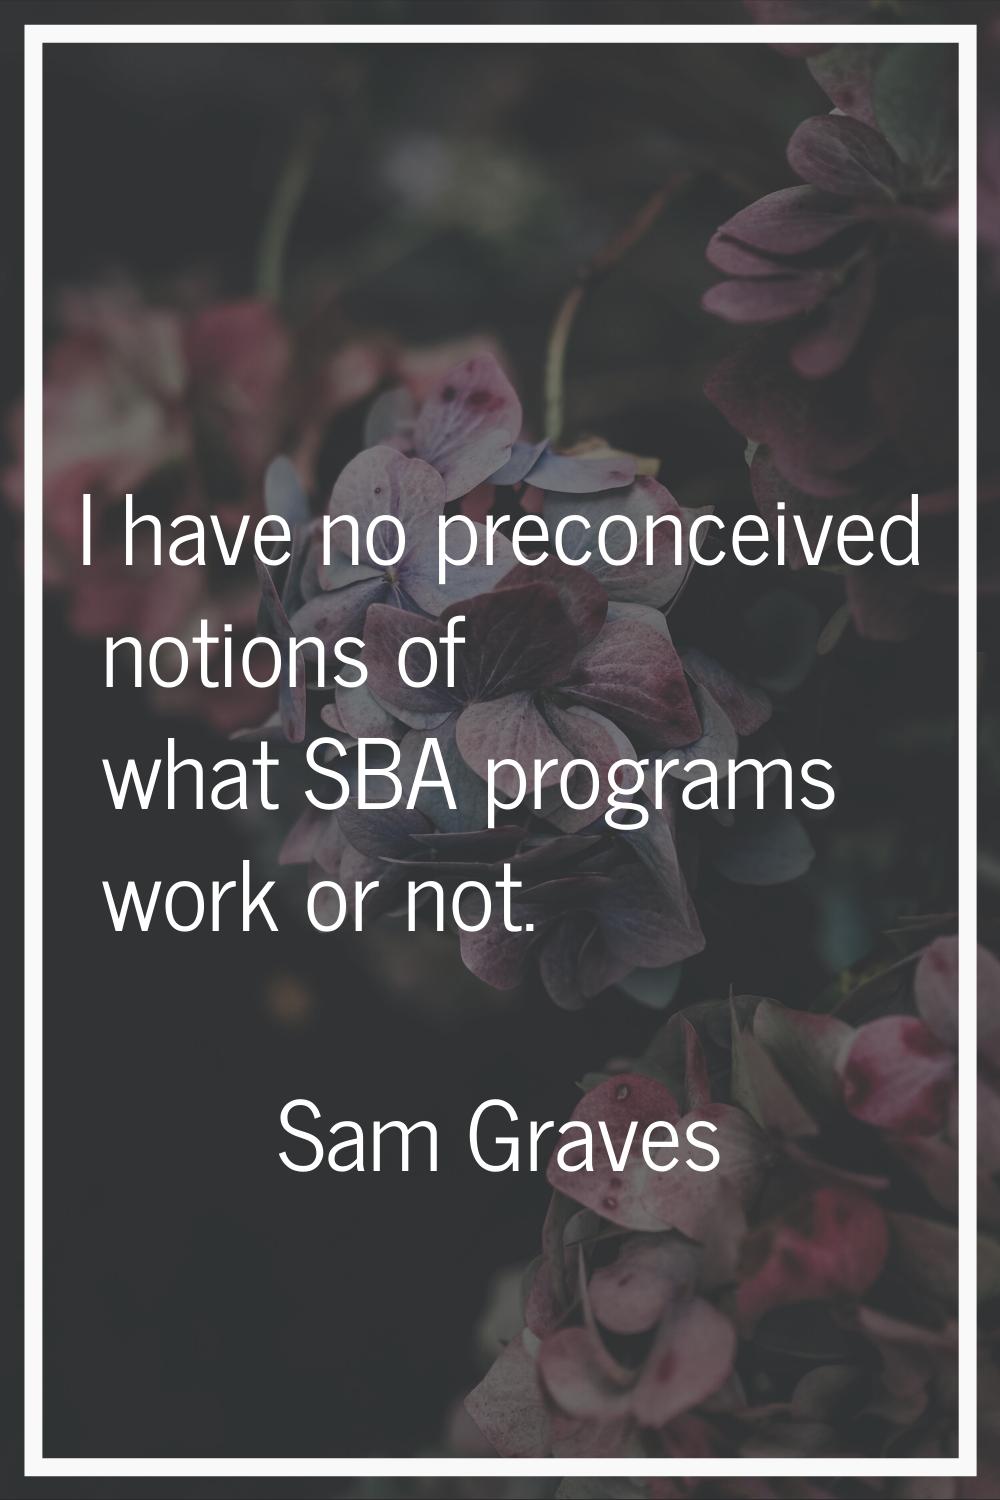 I have no preconceived notions of what SBA programs work or not.